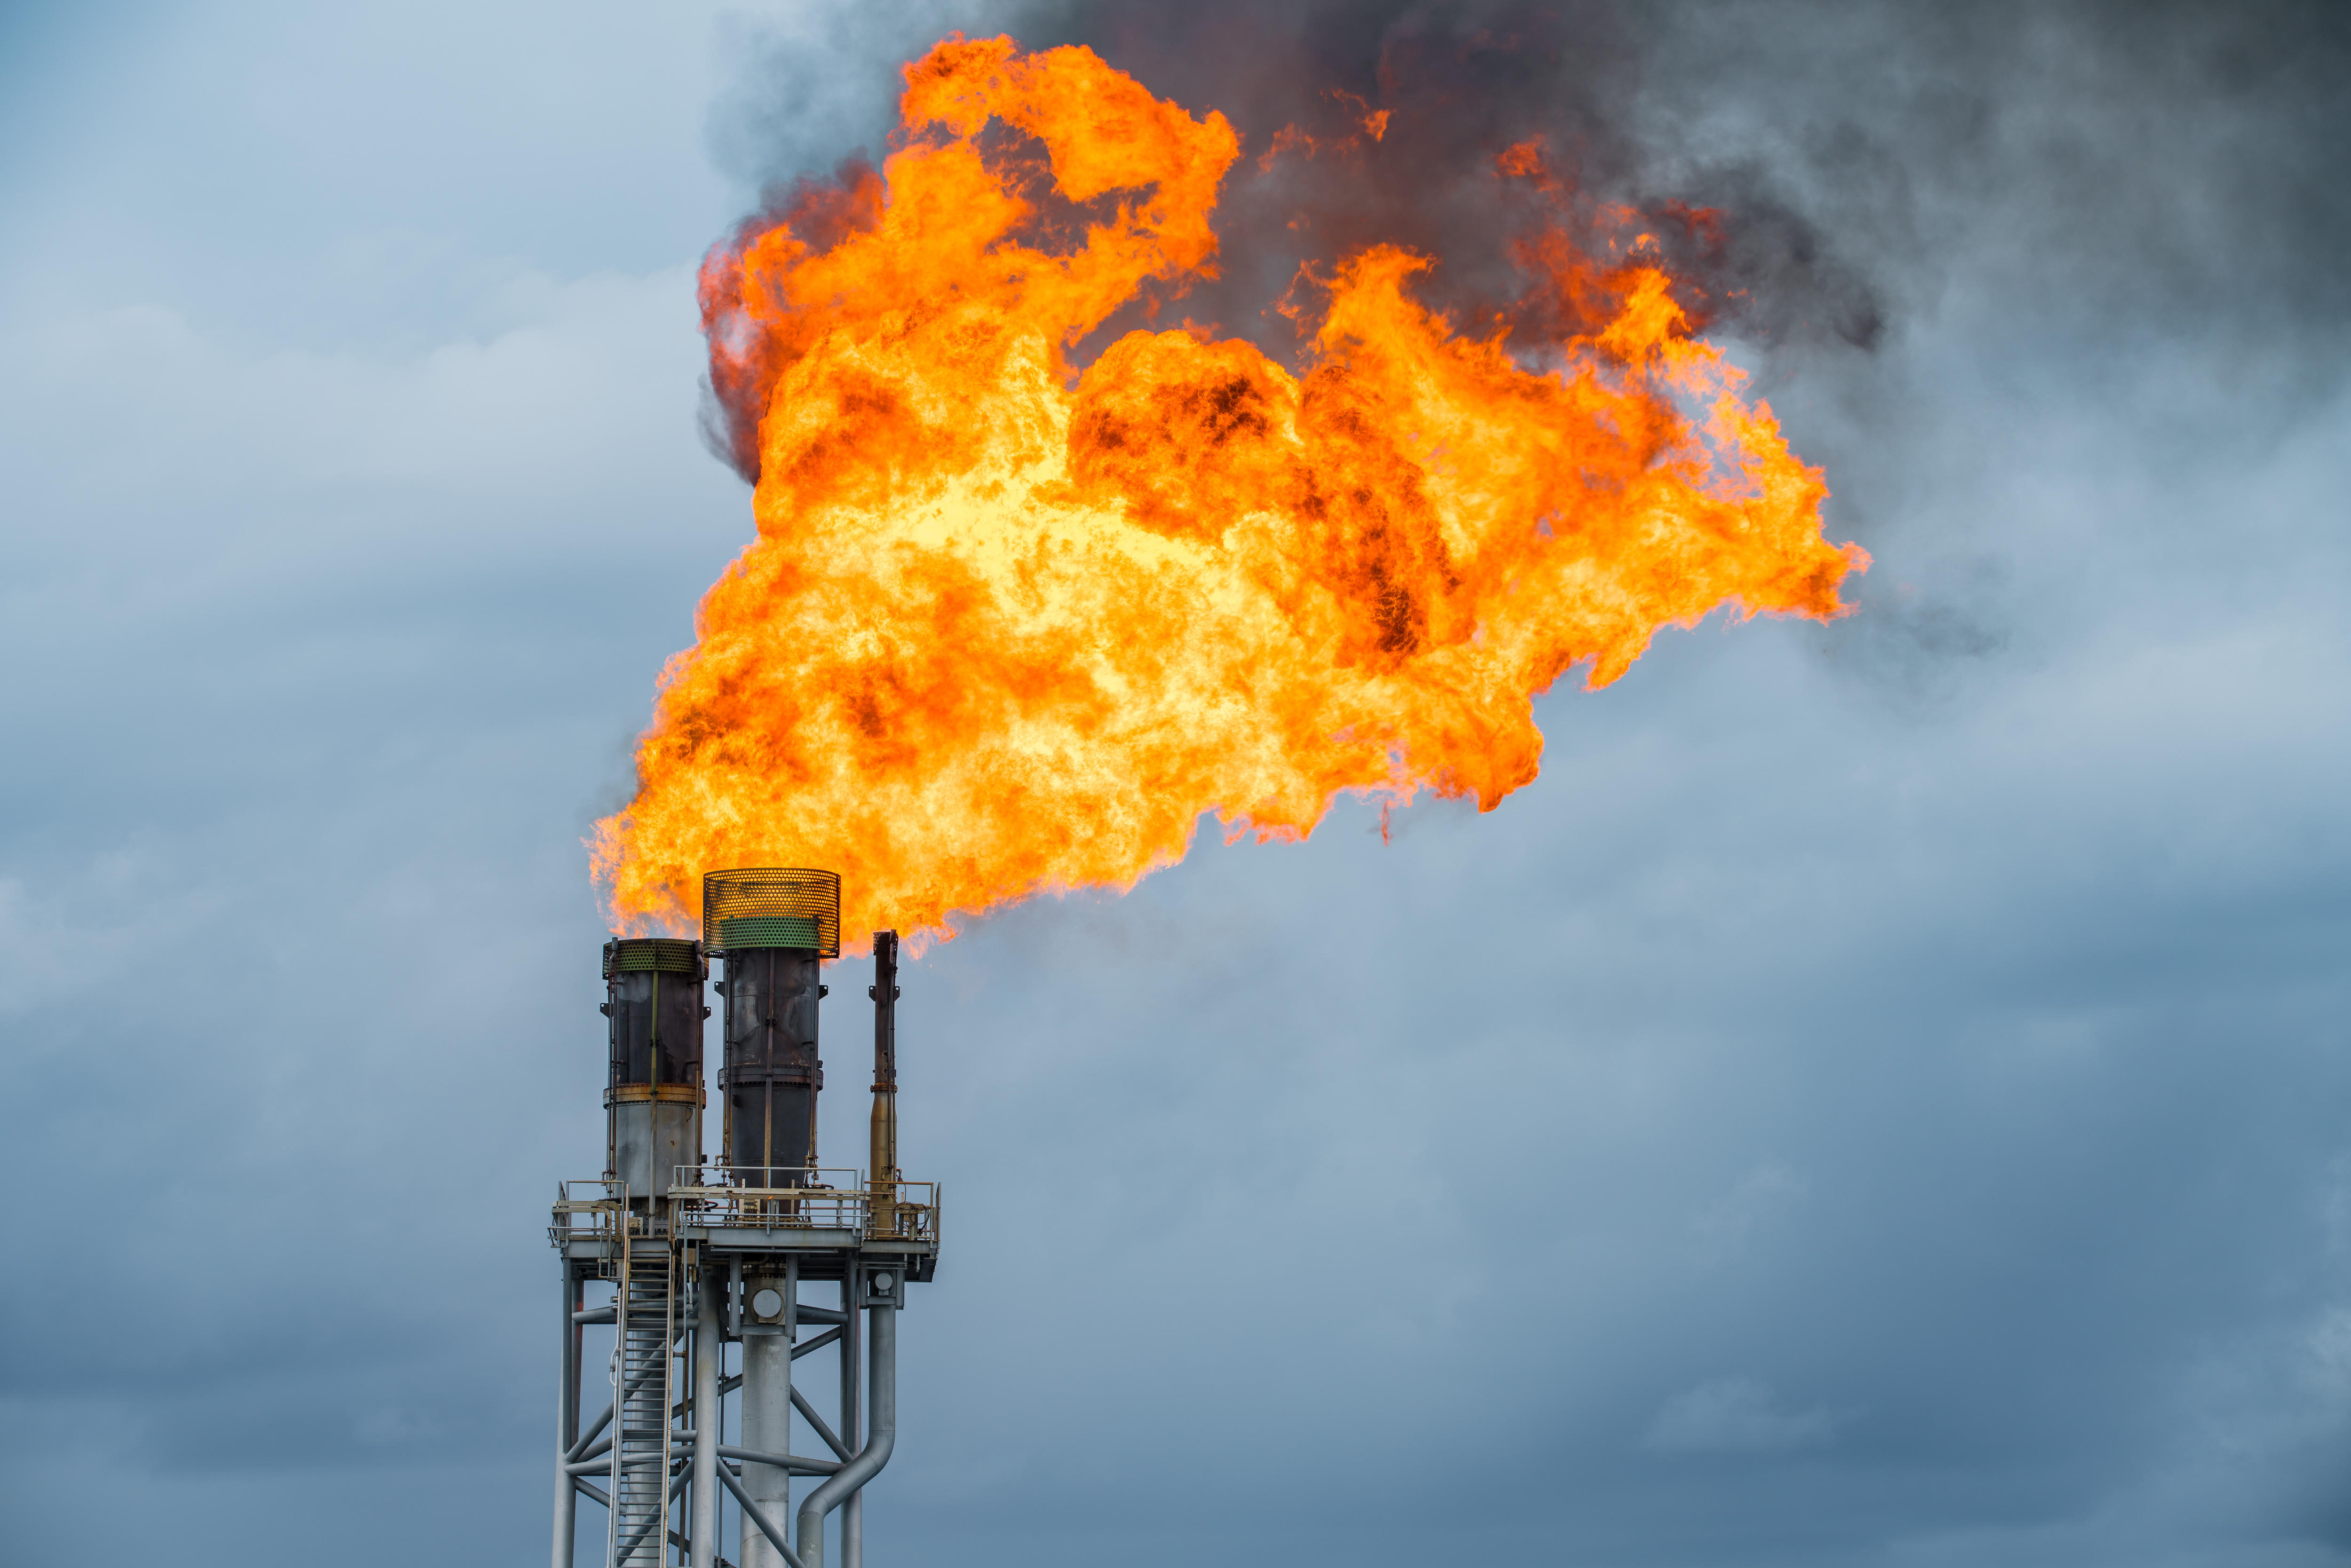 A gas flare